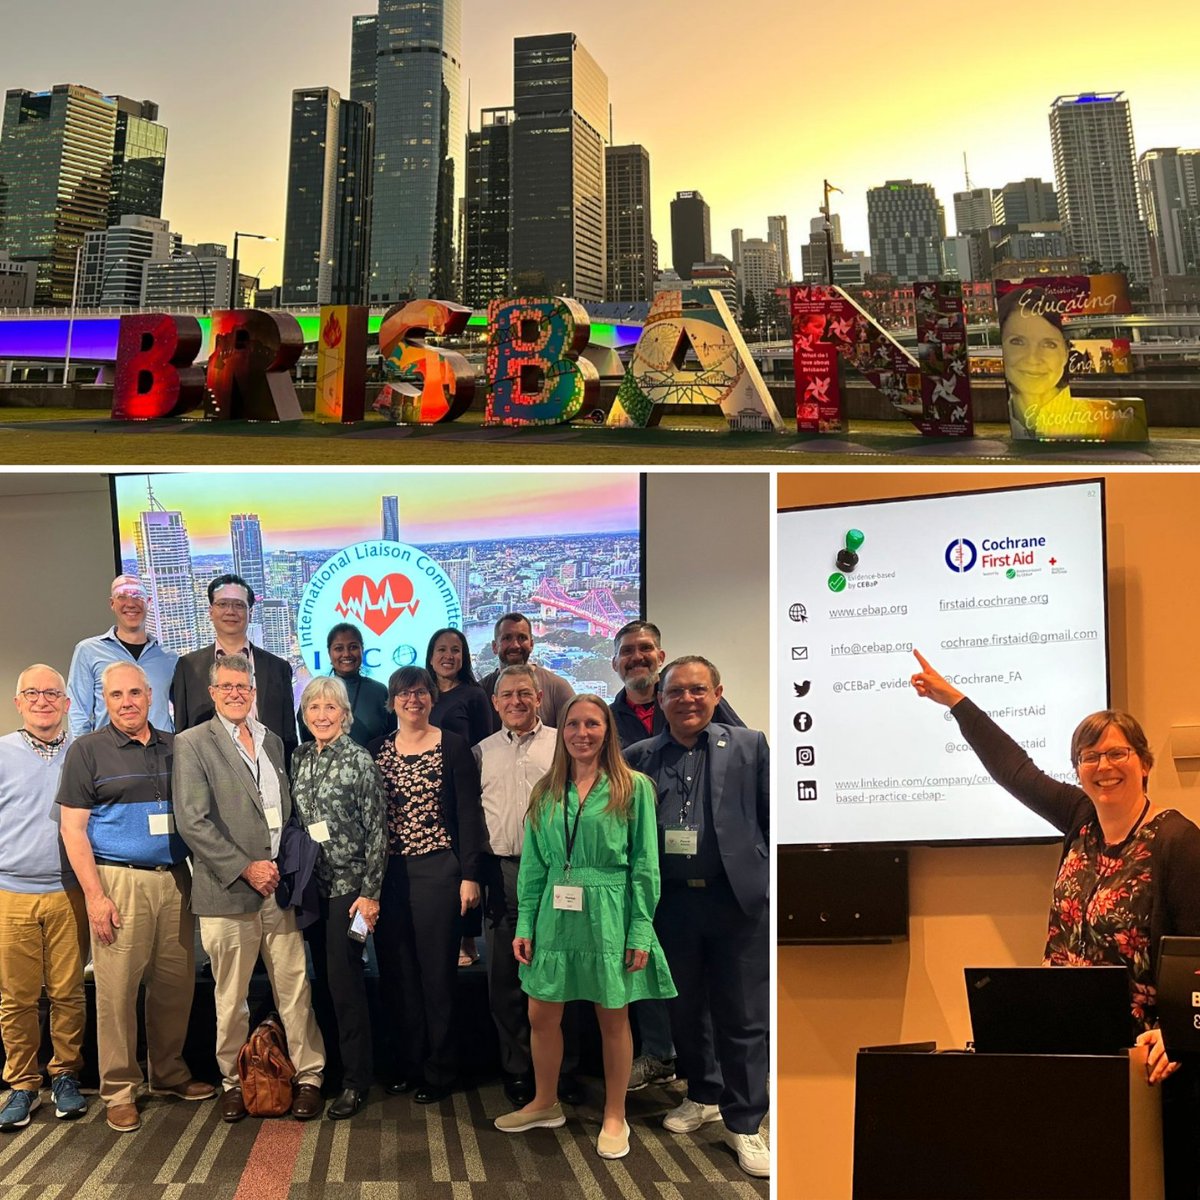 And... it's a wrap! Thanks to the entire @Ilcor_org #FirstAid Task Force for a productive and enjoyable face-to-face meeting the last 3 days! 🤓🇦🇺 @GFARC_IFRC @RedCross @redcrosscanada @AustralianResus @cochranecollab